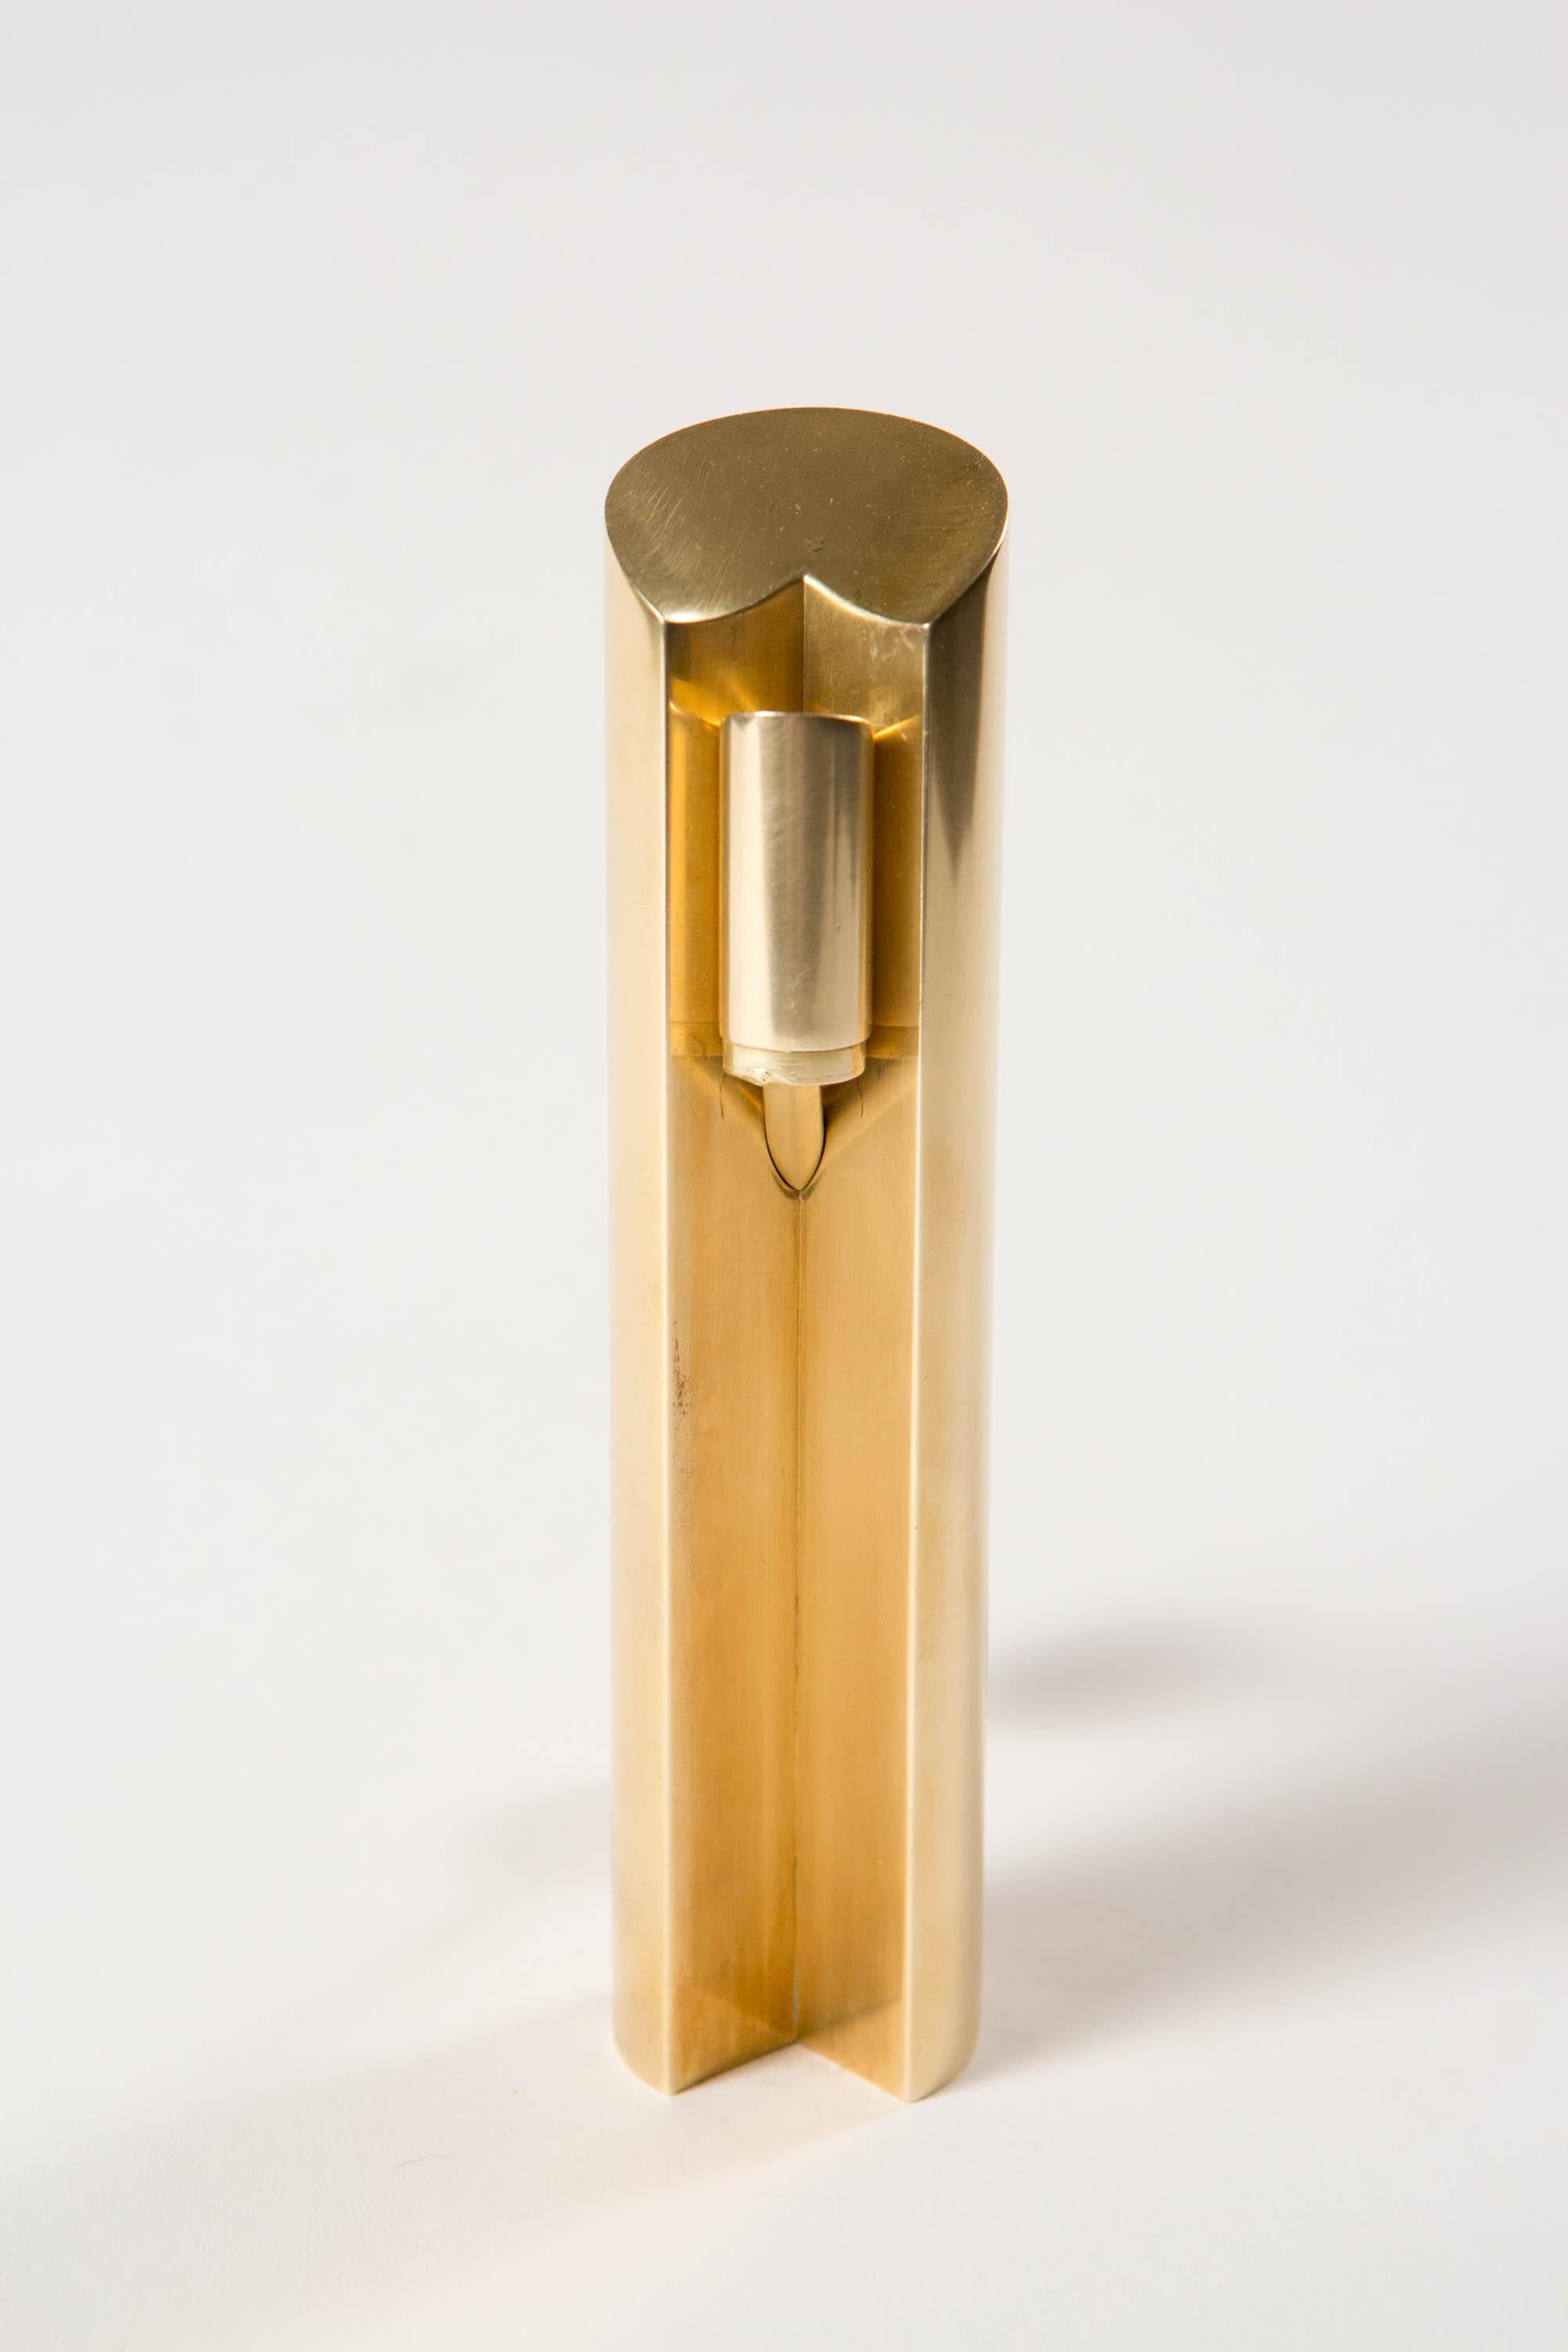 20th Century Pierre Forsell, Candlestick Model Variabel Produced by Skultuna, Sweden 1950's For Sale